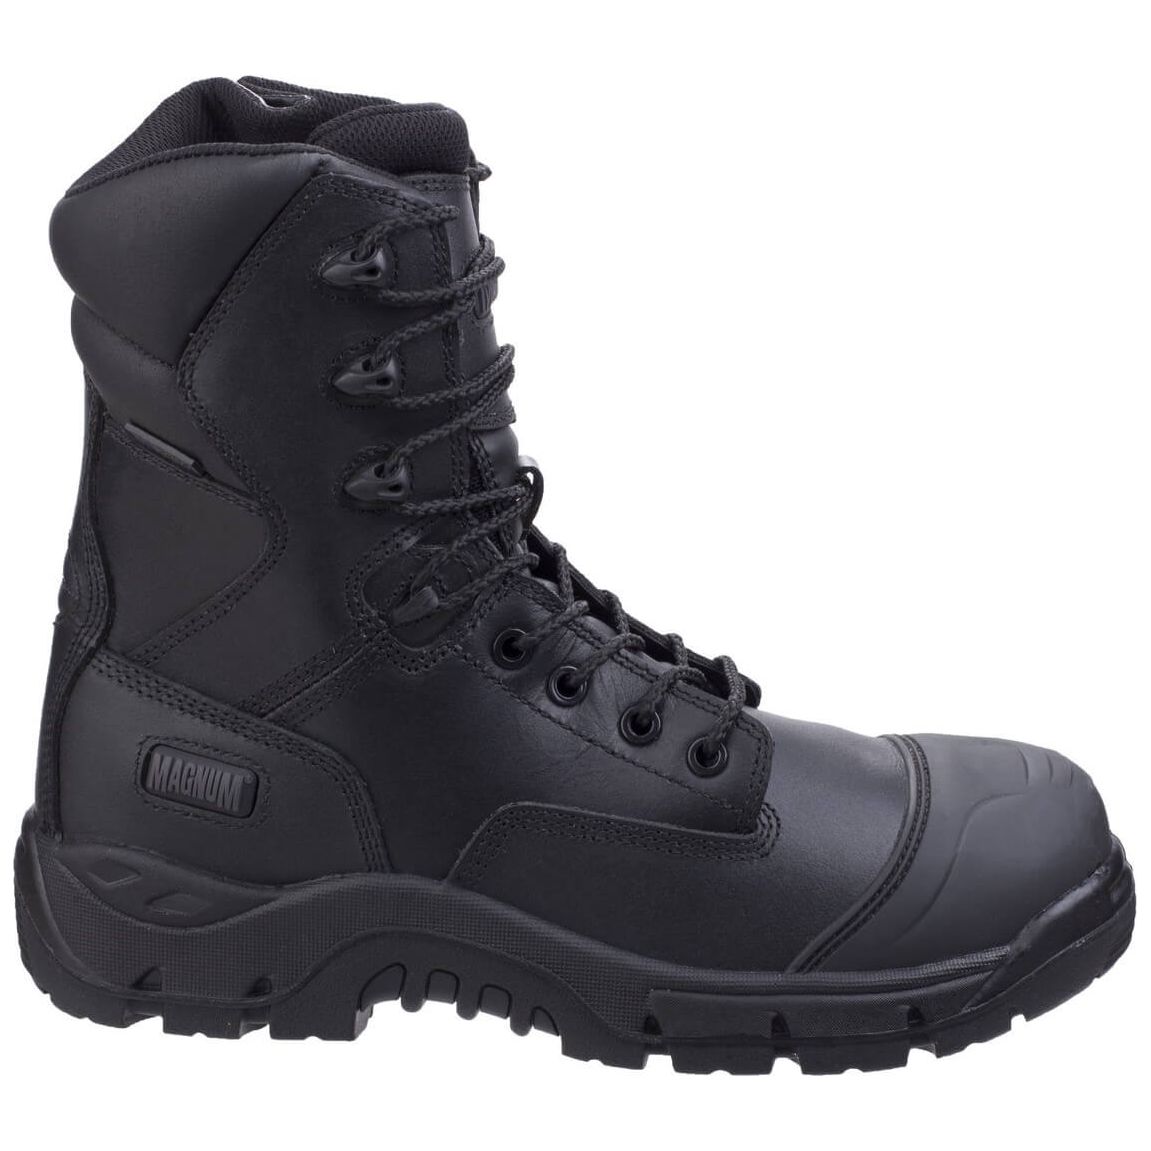 Magnum Rigmaster Safety Boots-Black-5